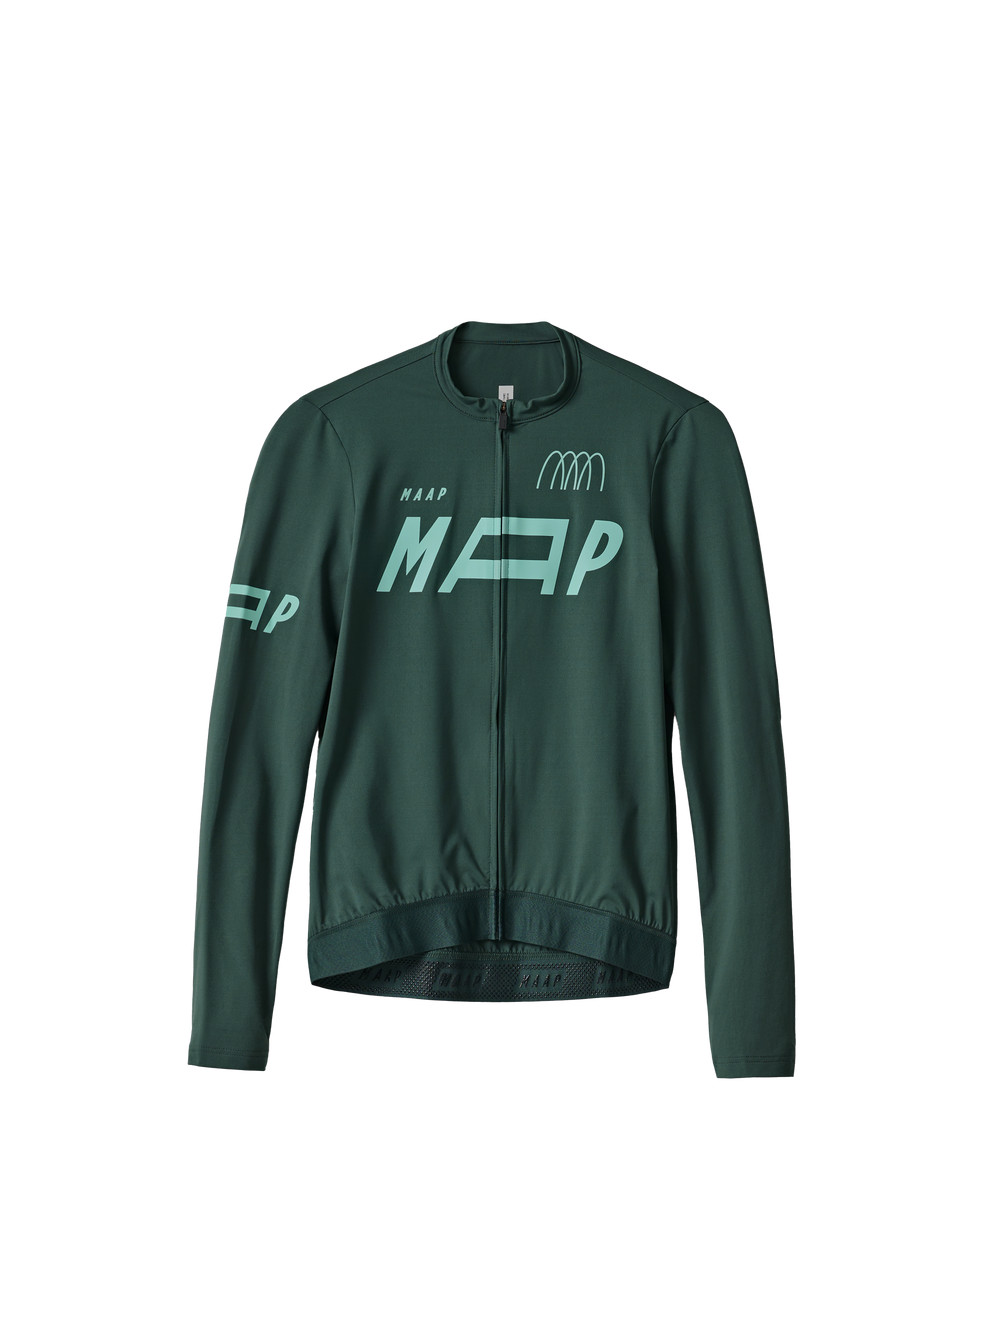 Product Image for Women's Adapt LS Jersey